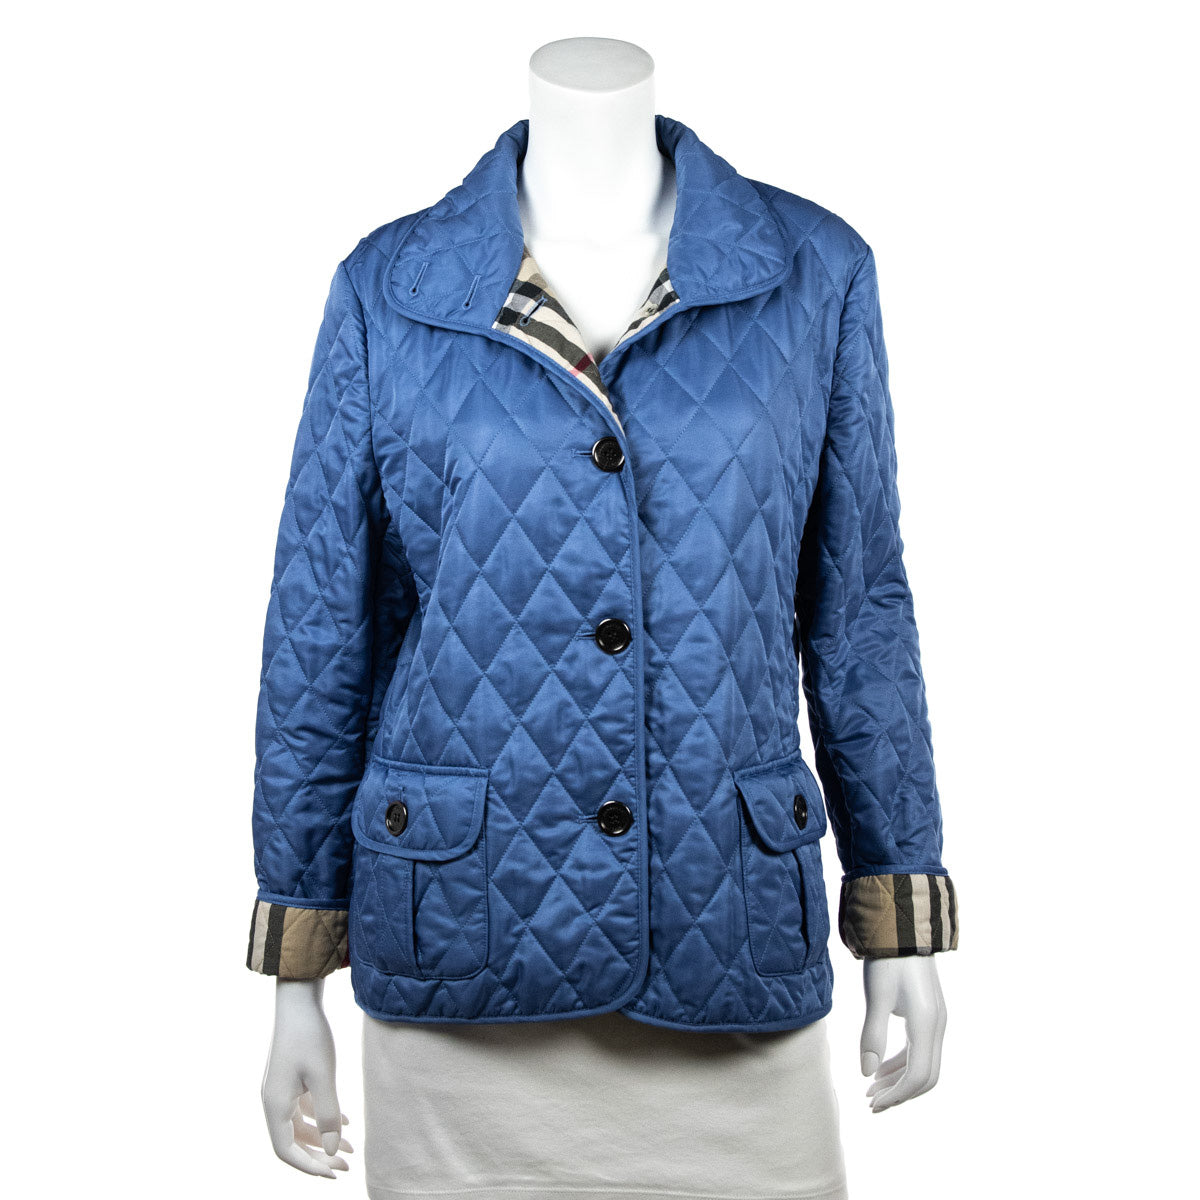 Burberry Brit Blue Quilted Jacket - Secondhand Burberry Jackets Canada